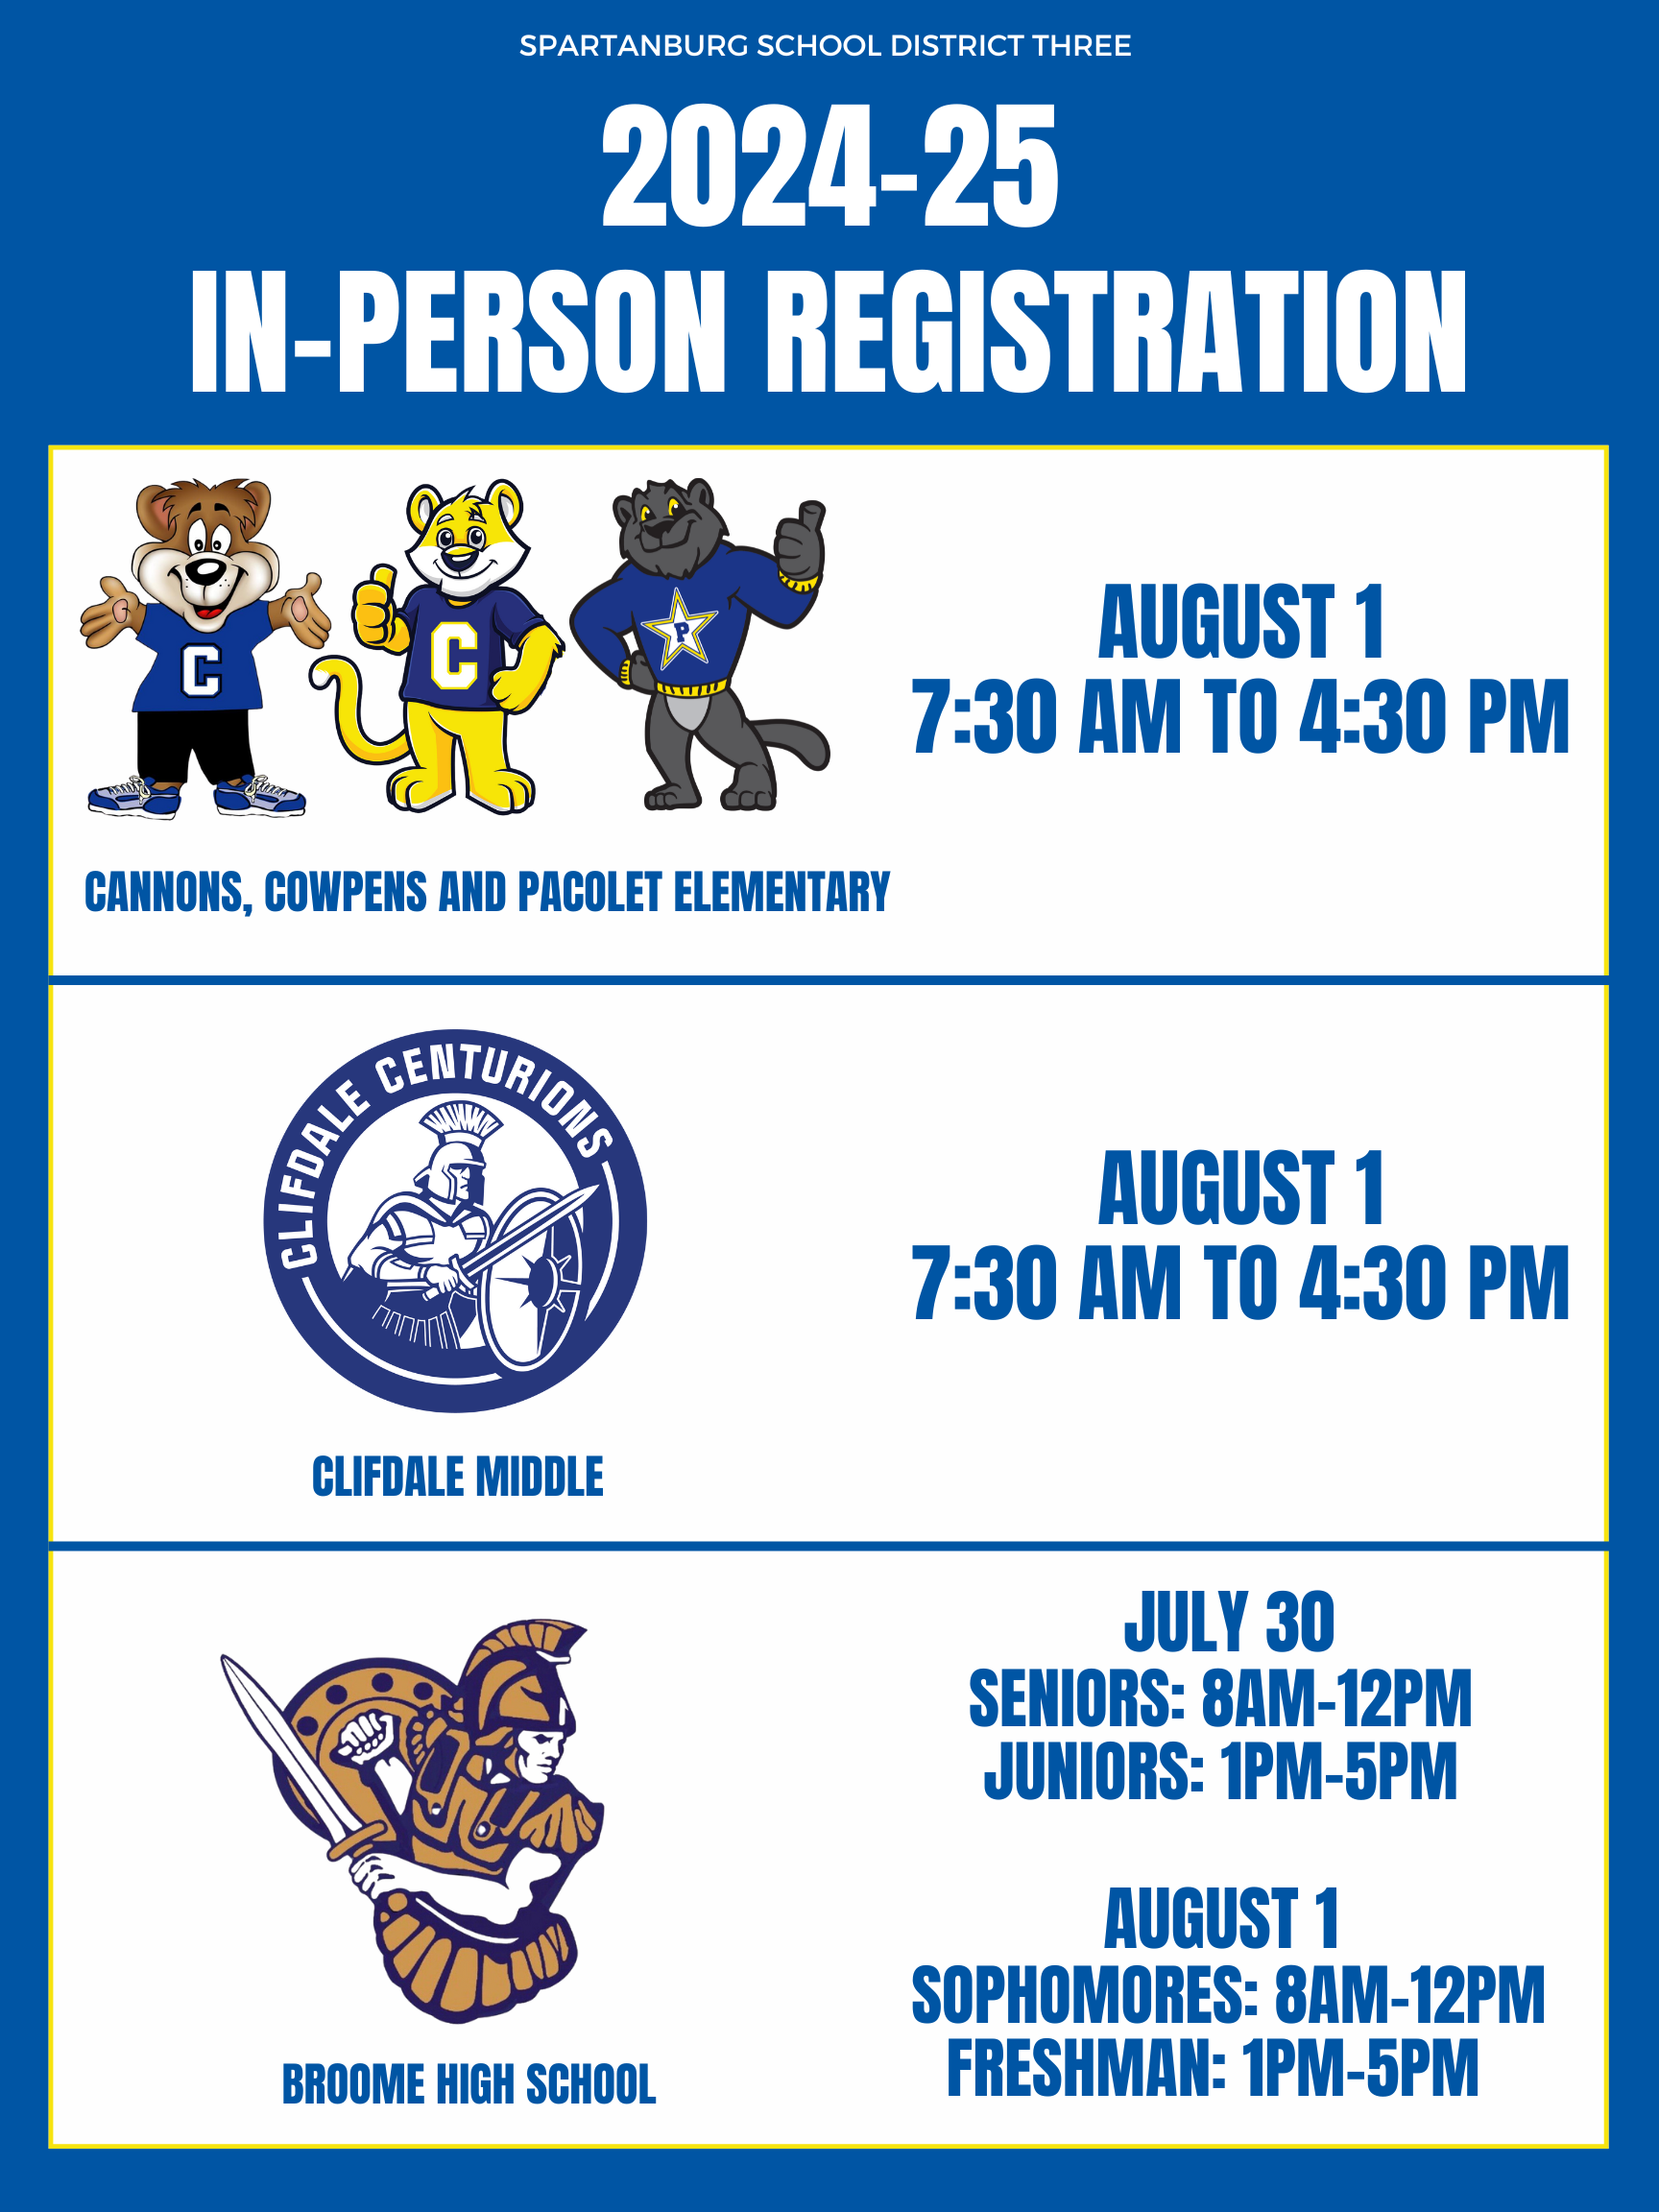 In-person registration 2024-25 dates